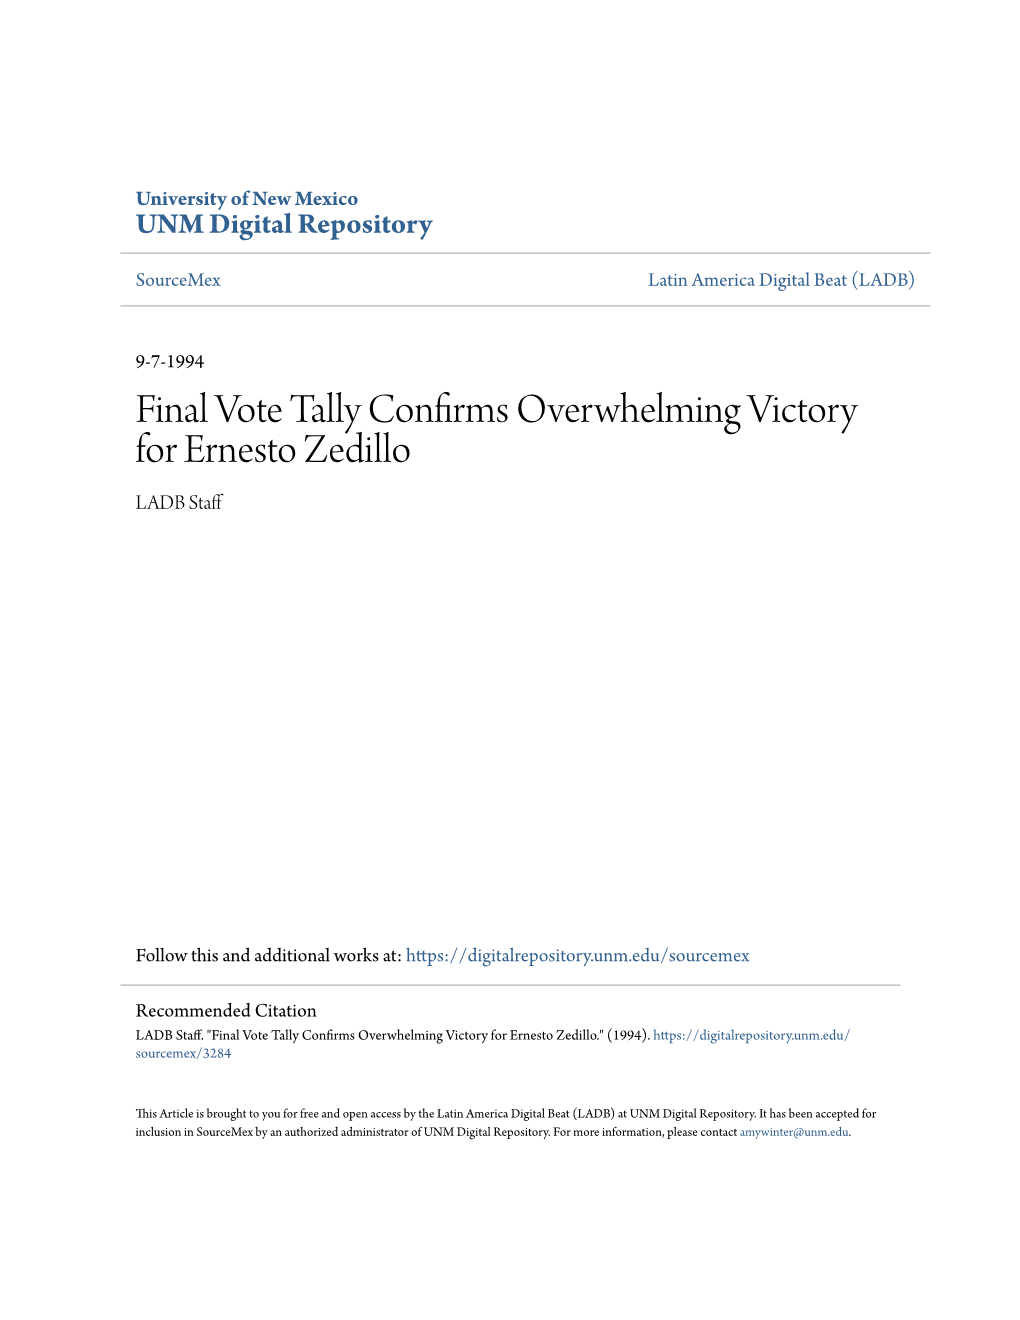 Final Vote Tally Confirms Overwhelming Victory for Ernesto Zedillo LADB Staff